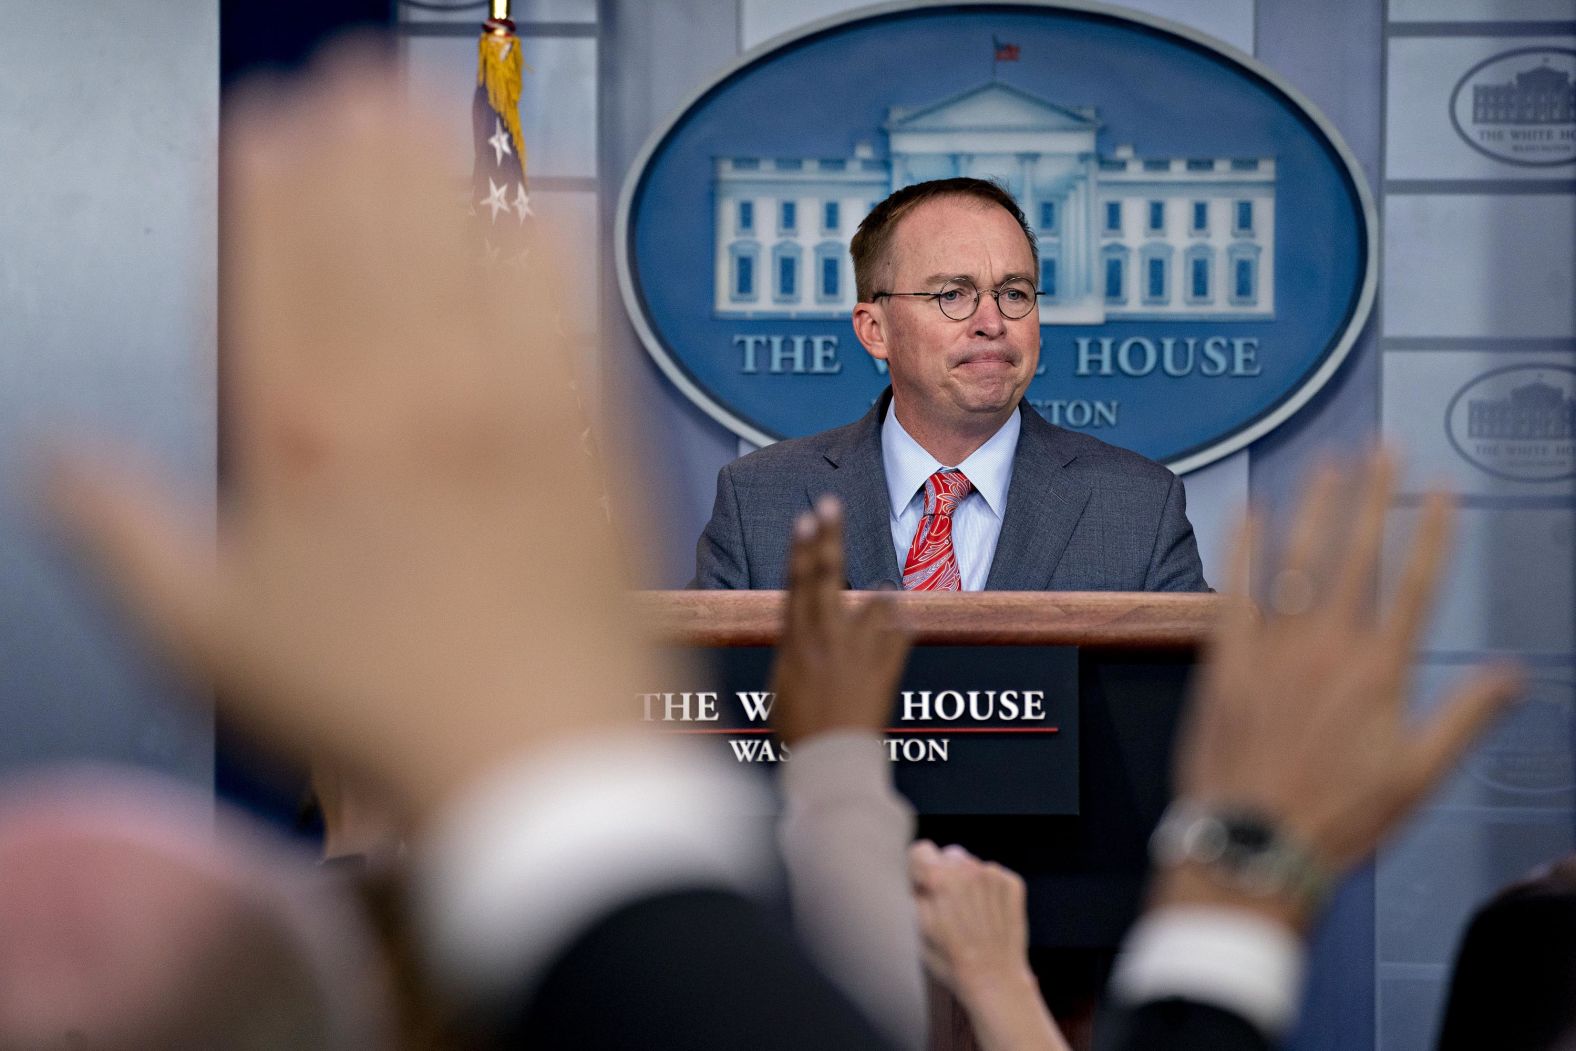 White House acting chief of staff Mick Mulvaney pauses for a question during a White House news conference on October 17. After weeks during which Trump denied the existence of any political quid pro quo in his withholding of security aid to Ukraine, <a href="index.php?page=&url=https%3A%2F%2Fwww.cnn.com%2F2019%2F10%2F17%2Fpolitics%2Fmick-mulvaney-quid-pro-quo-donald-trump-ukraine-aid%2Findex.html" target="_blank">Mulvaney confirmed the existence of a quid pro quo</a> and offered this retort: "Get over it." Later that day, Mulvaney attempted to claim that he did not admit to the quid pro quo.